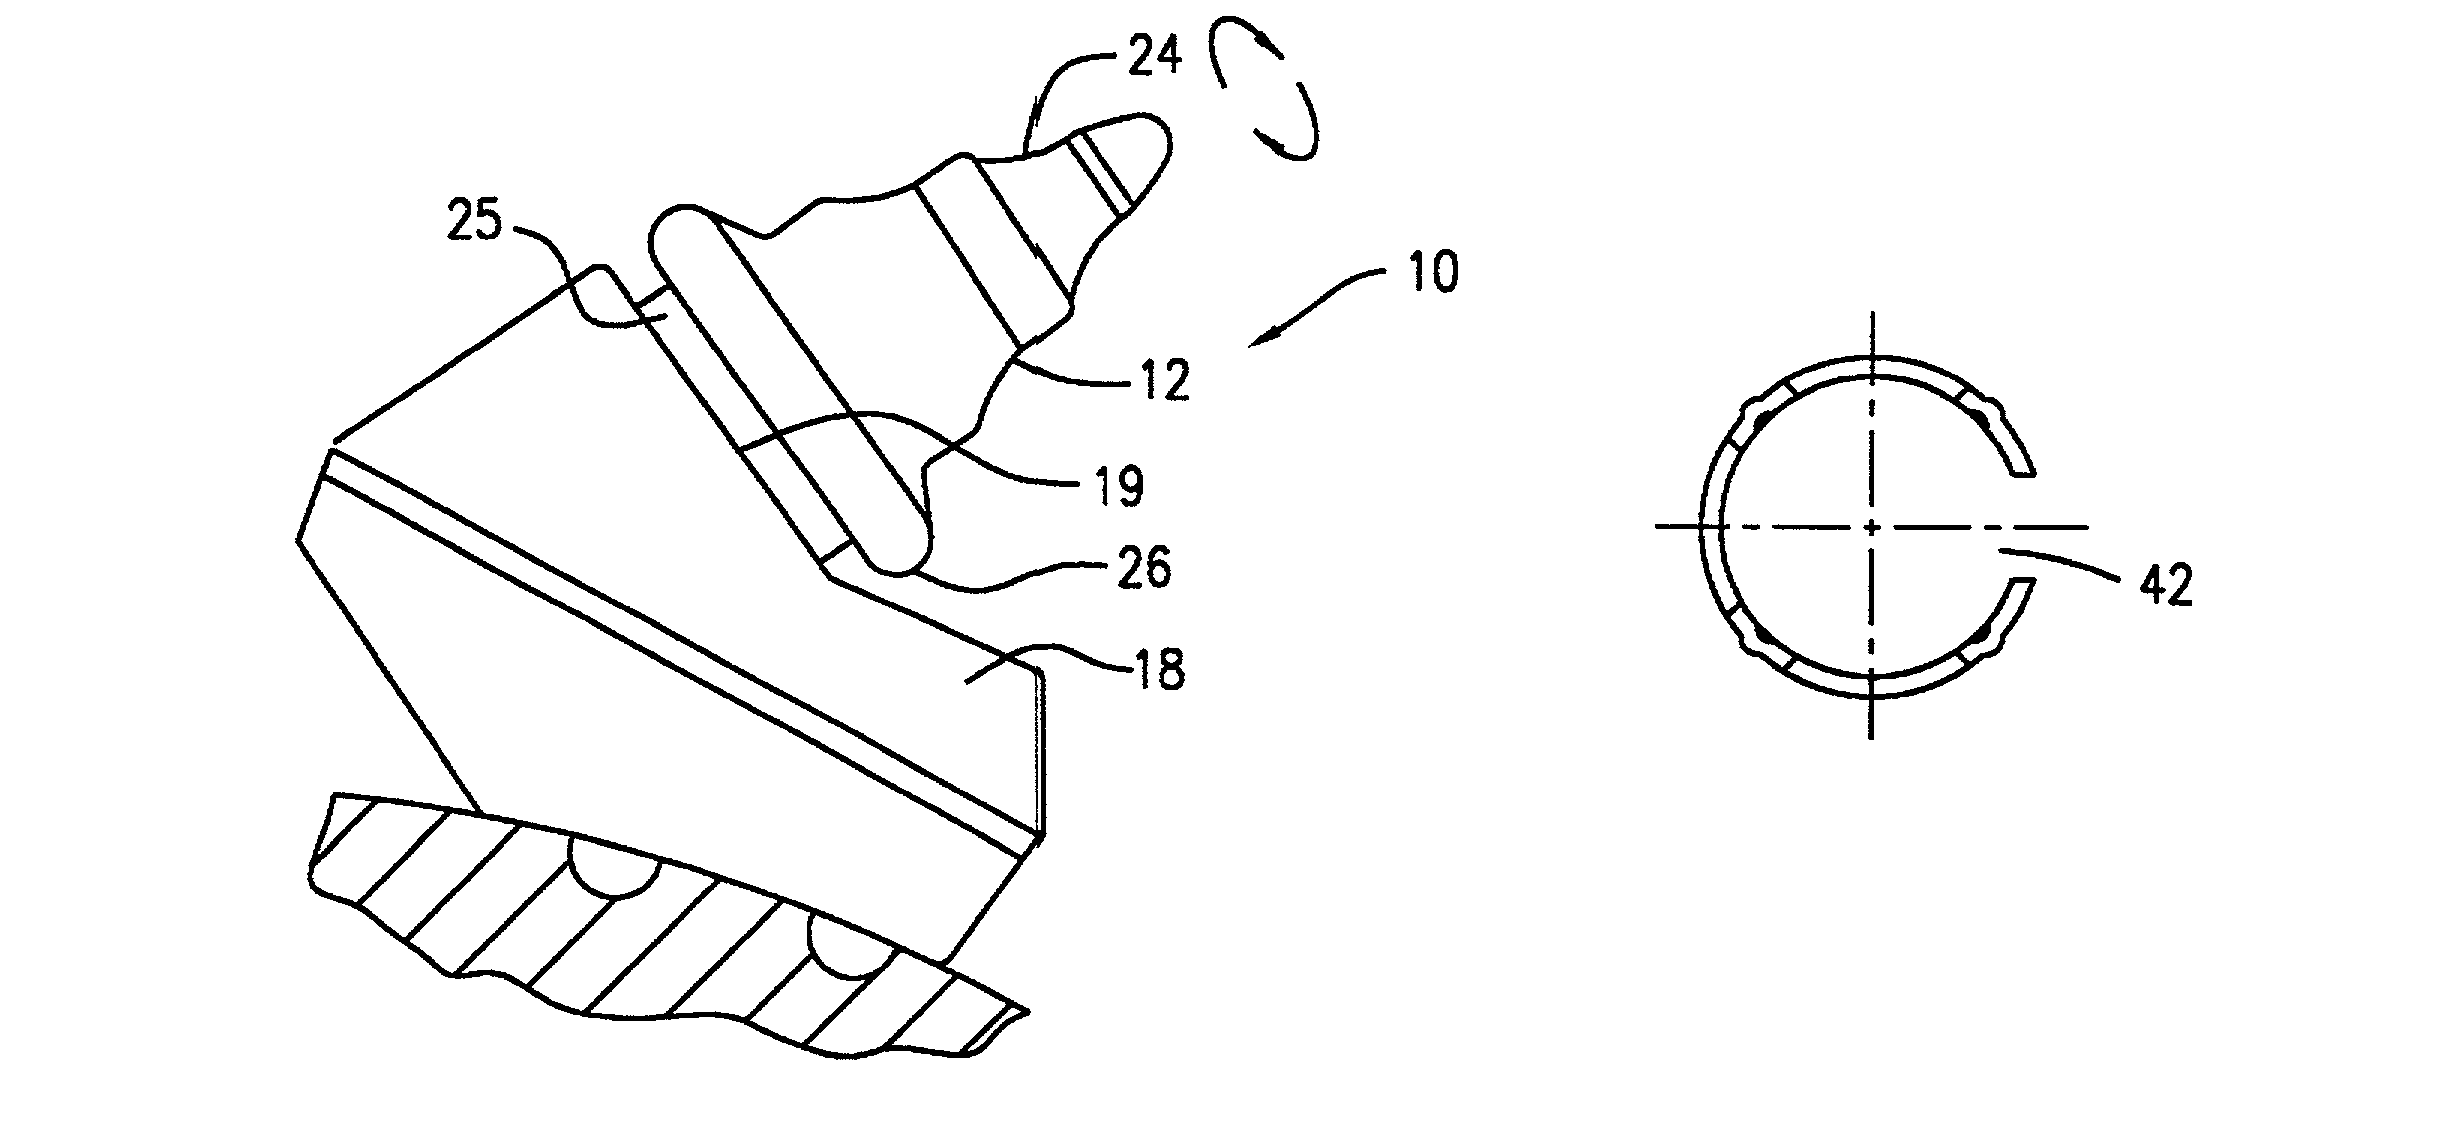 Rotatable cutting tool having retainer with dimples